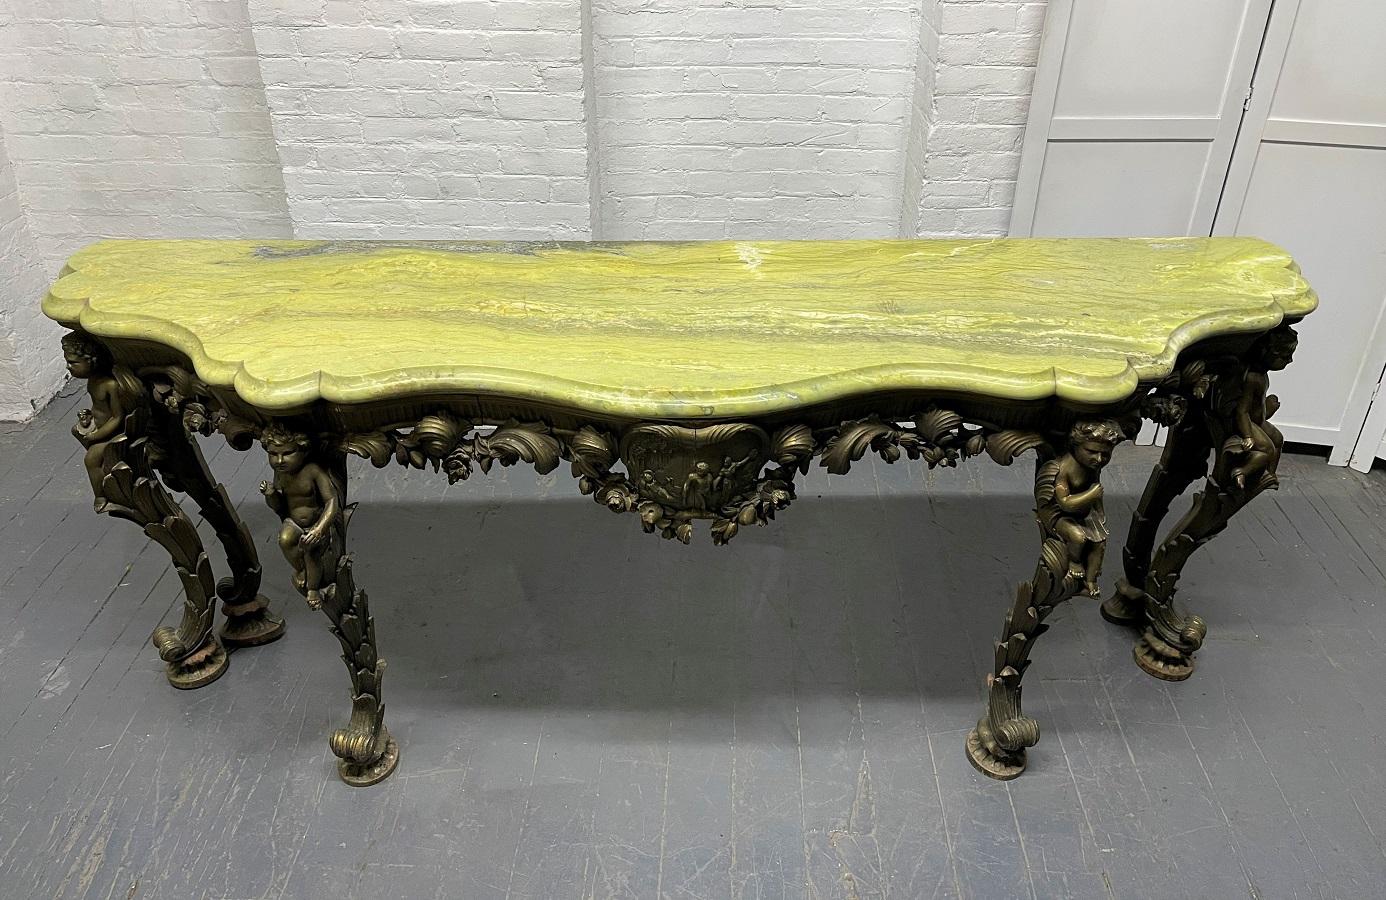 19th century Italian carved wood marble-top console. Has carved Puttis to the front and sides. Marble is green and one inch thick. The console is all carved wood.